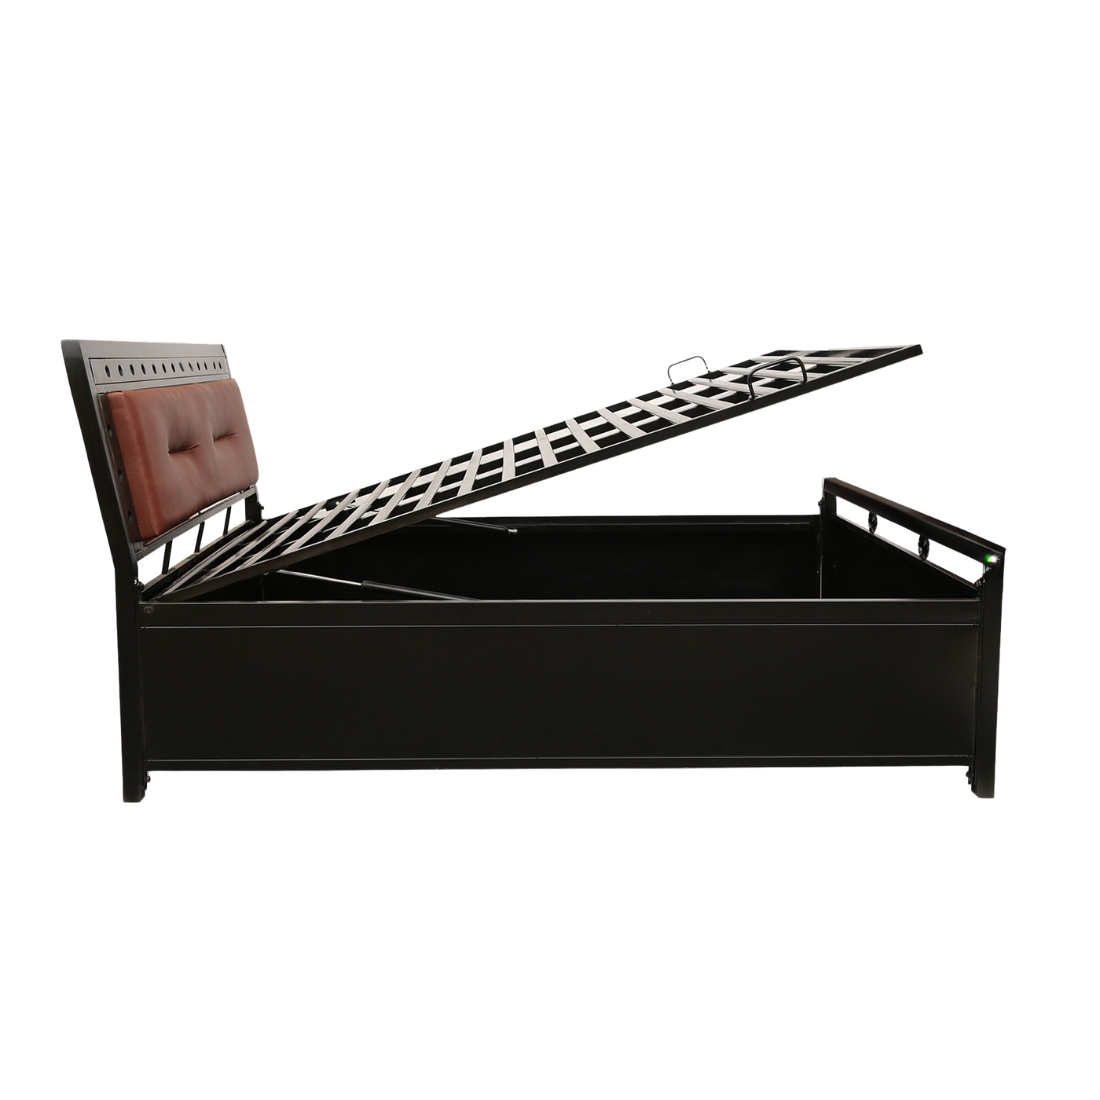 Daisy Hydraulic Storage Queen Metal Bed with Brown Cushion Headrest (Color - Black)